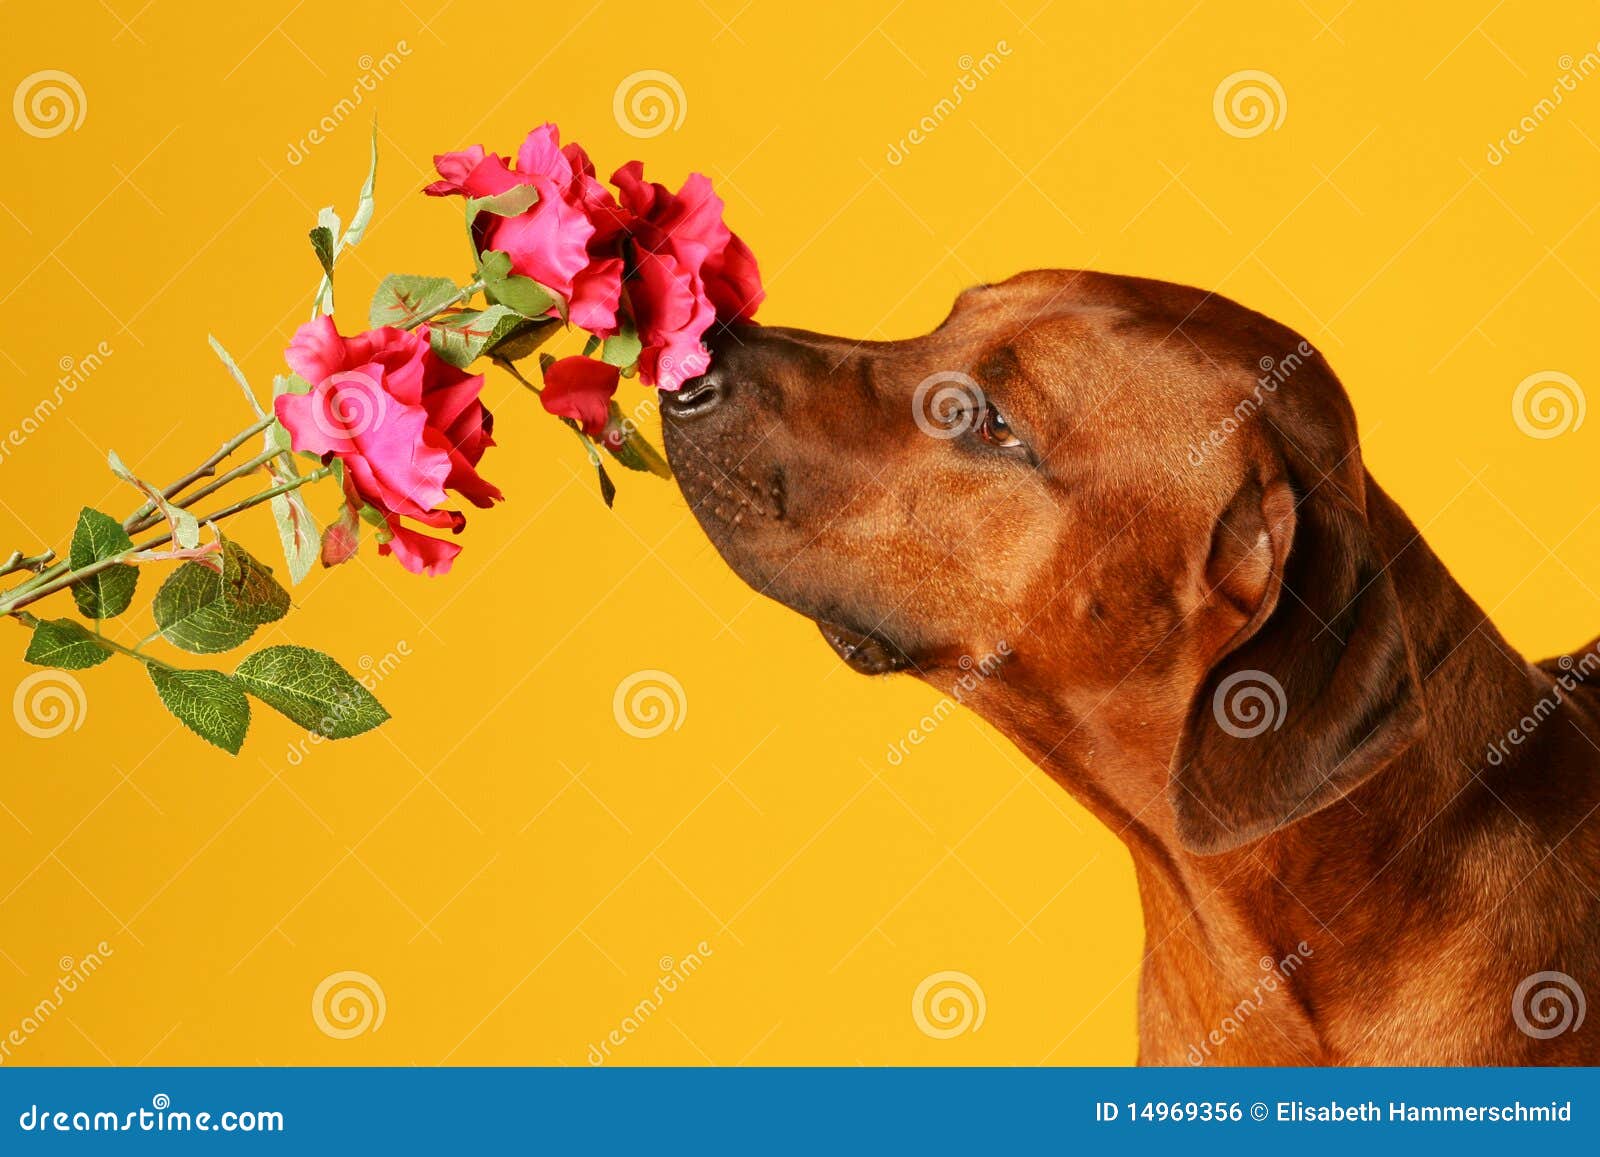 dog sniffing on a rose